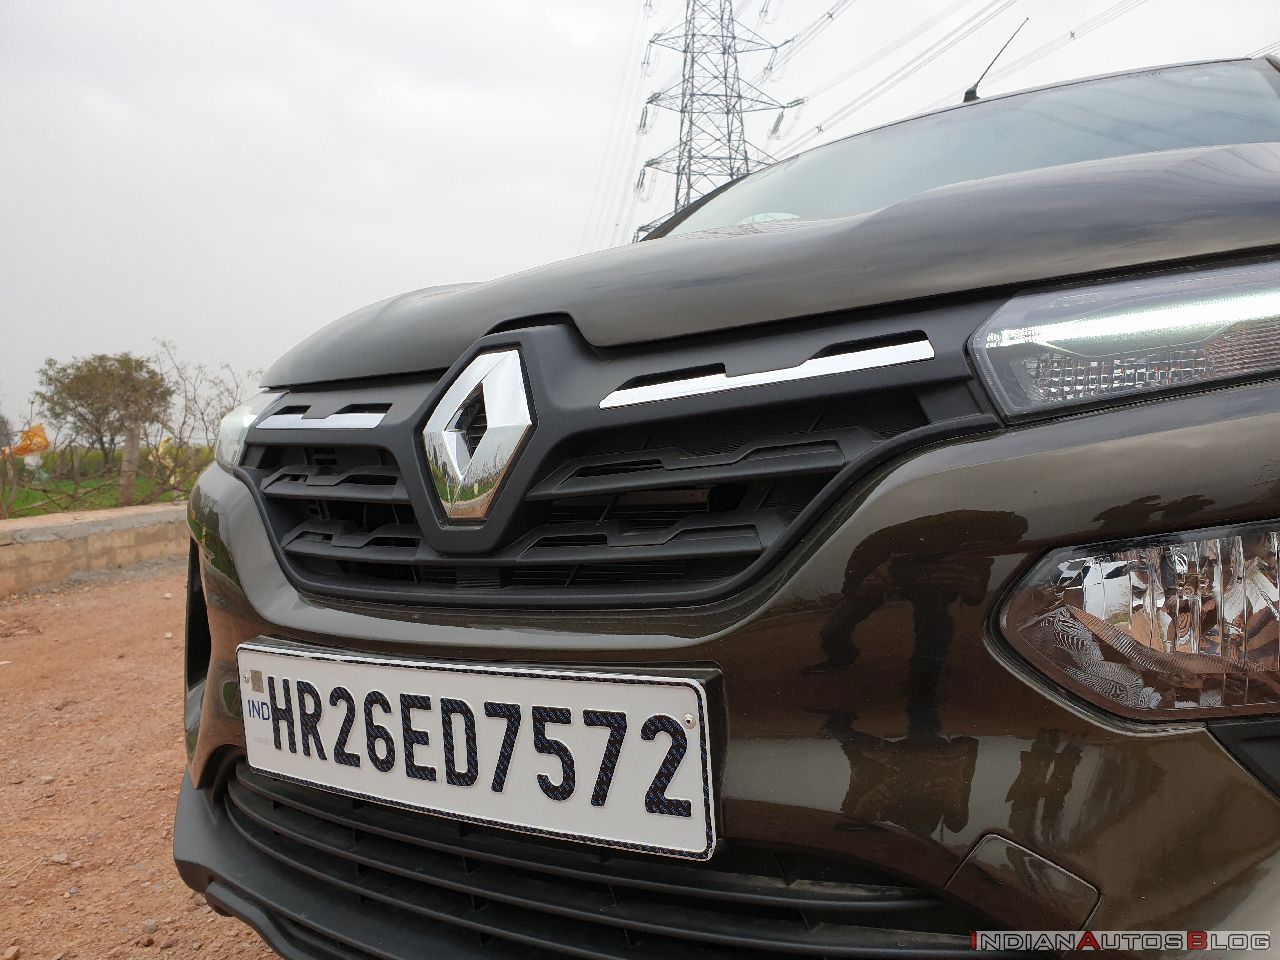 2020 Renault Kwid (facelift) - First Drive Review